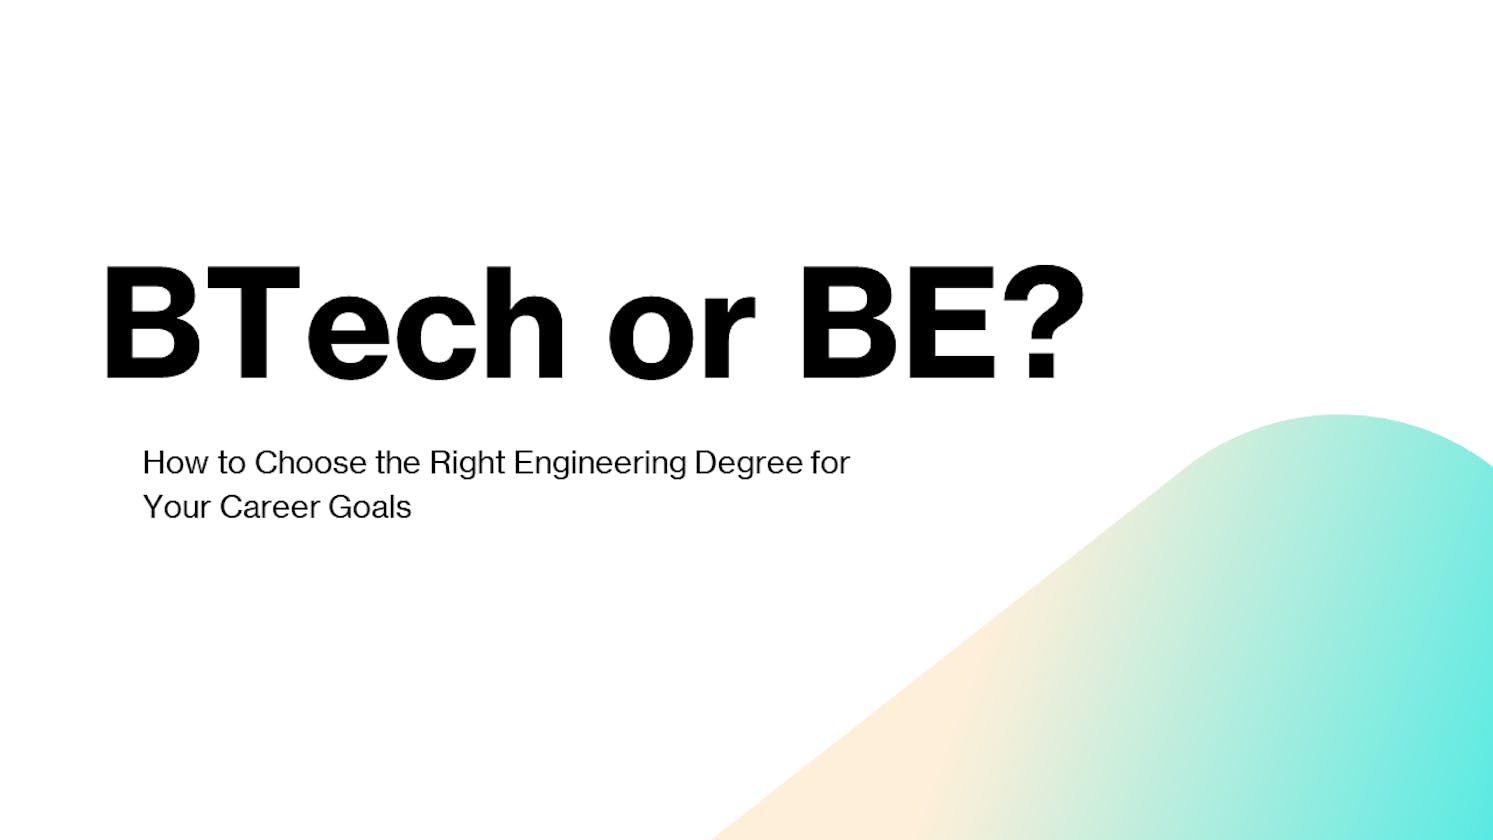 BTech or BE: How to Choose the Right Engineering Degree for Your Career Goals